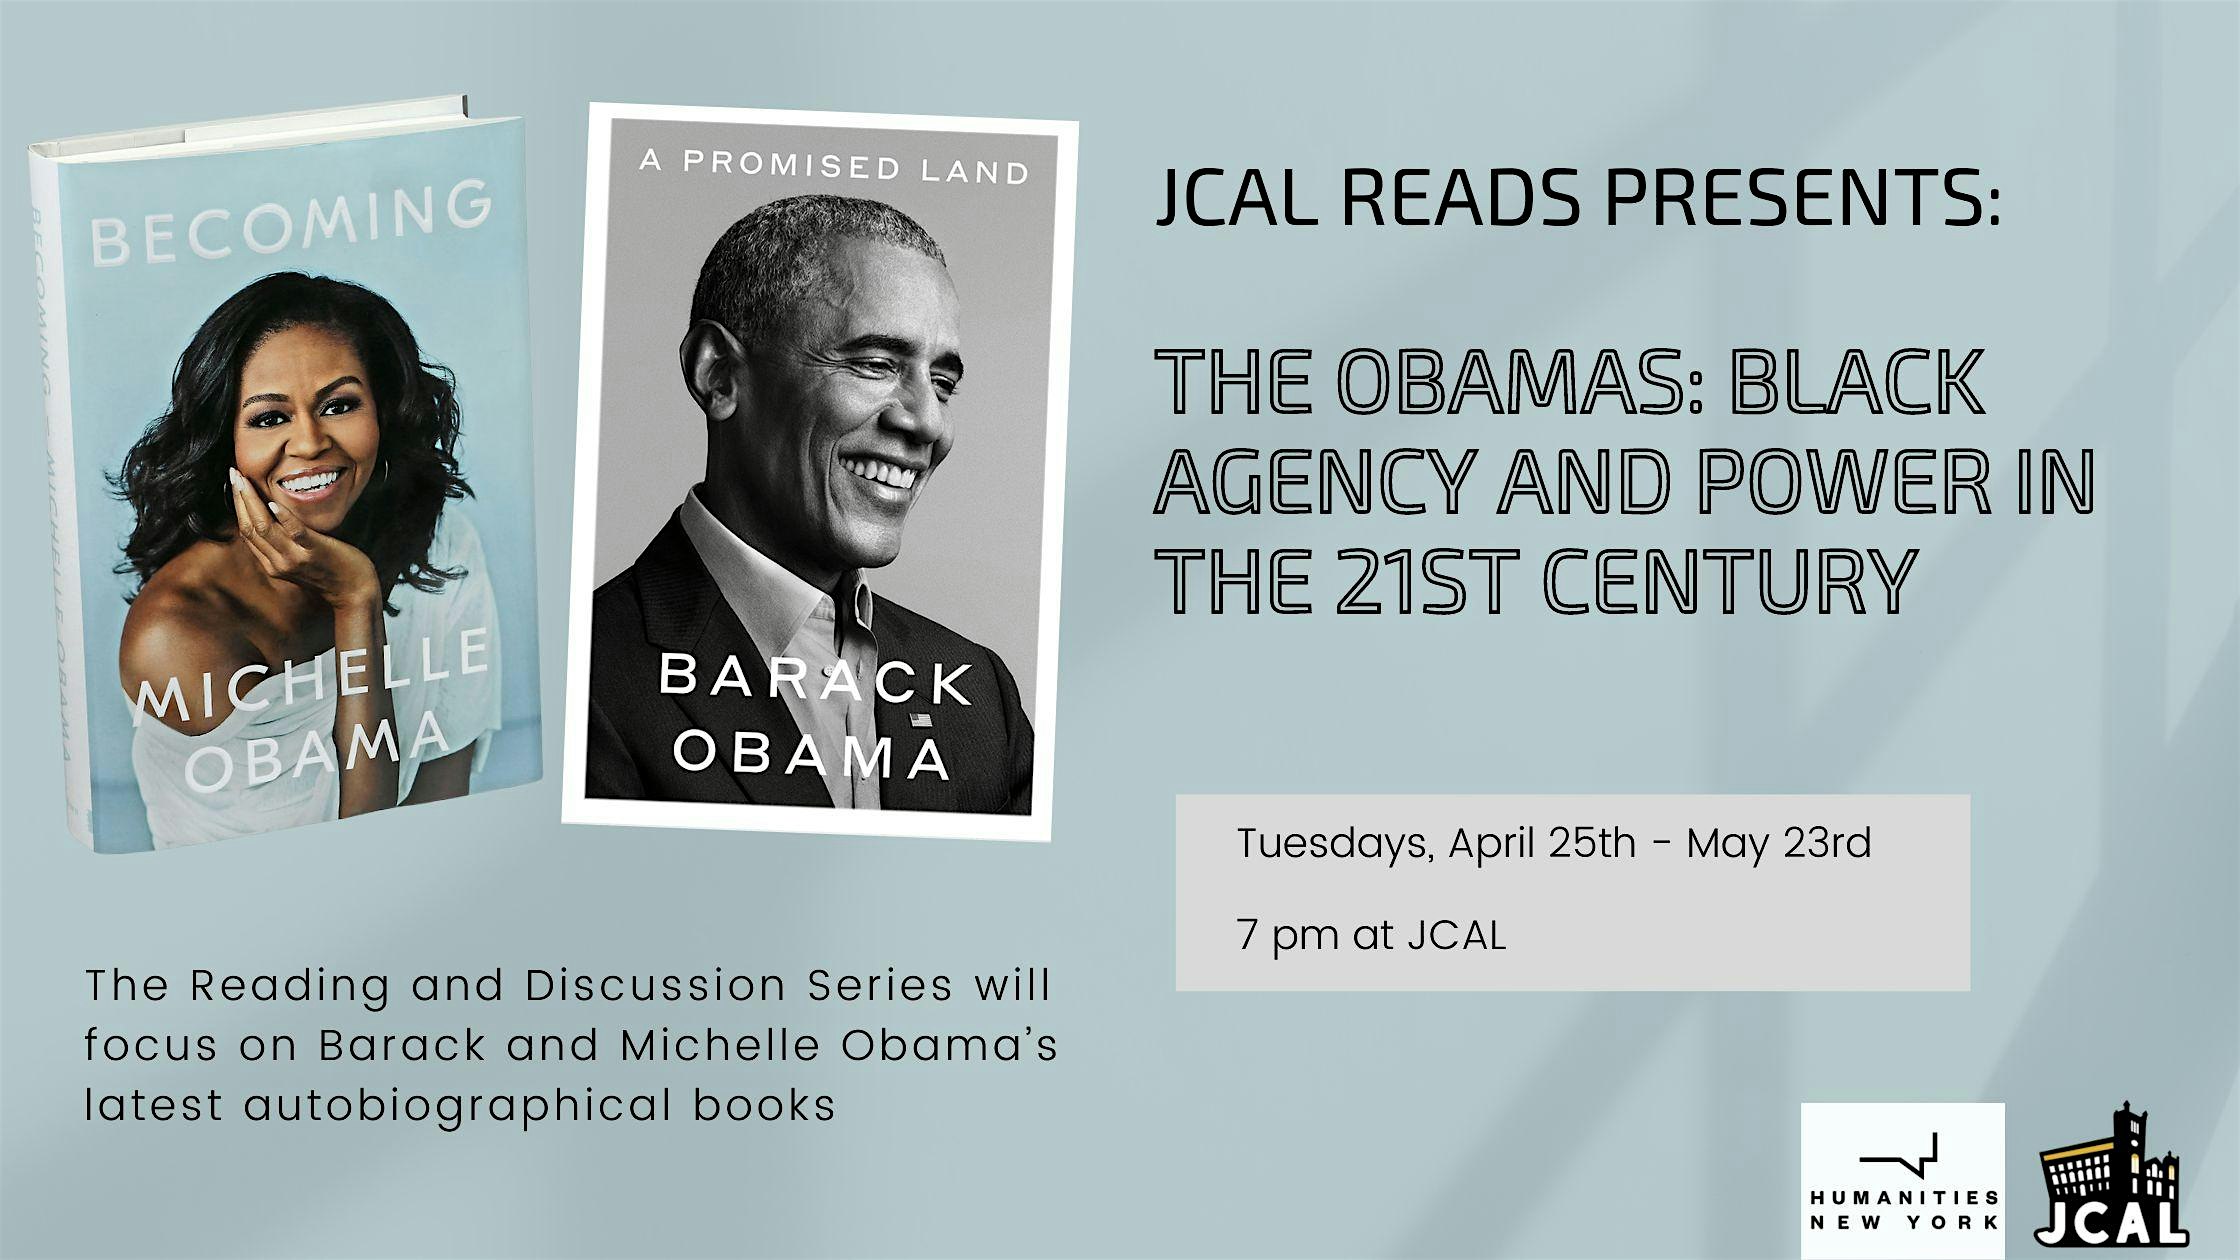 JCAL Reads - The Obamas: Black Agency and Power in the 21st Century